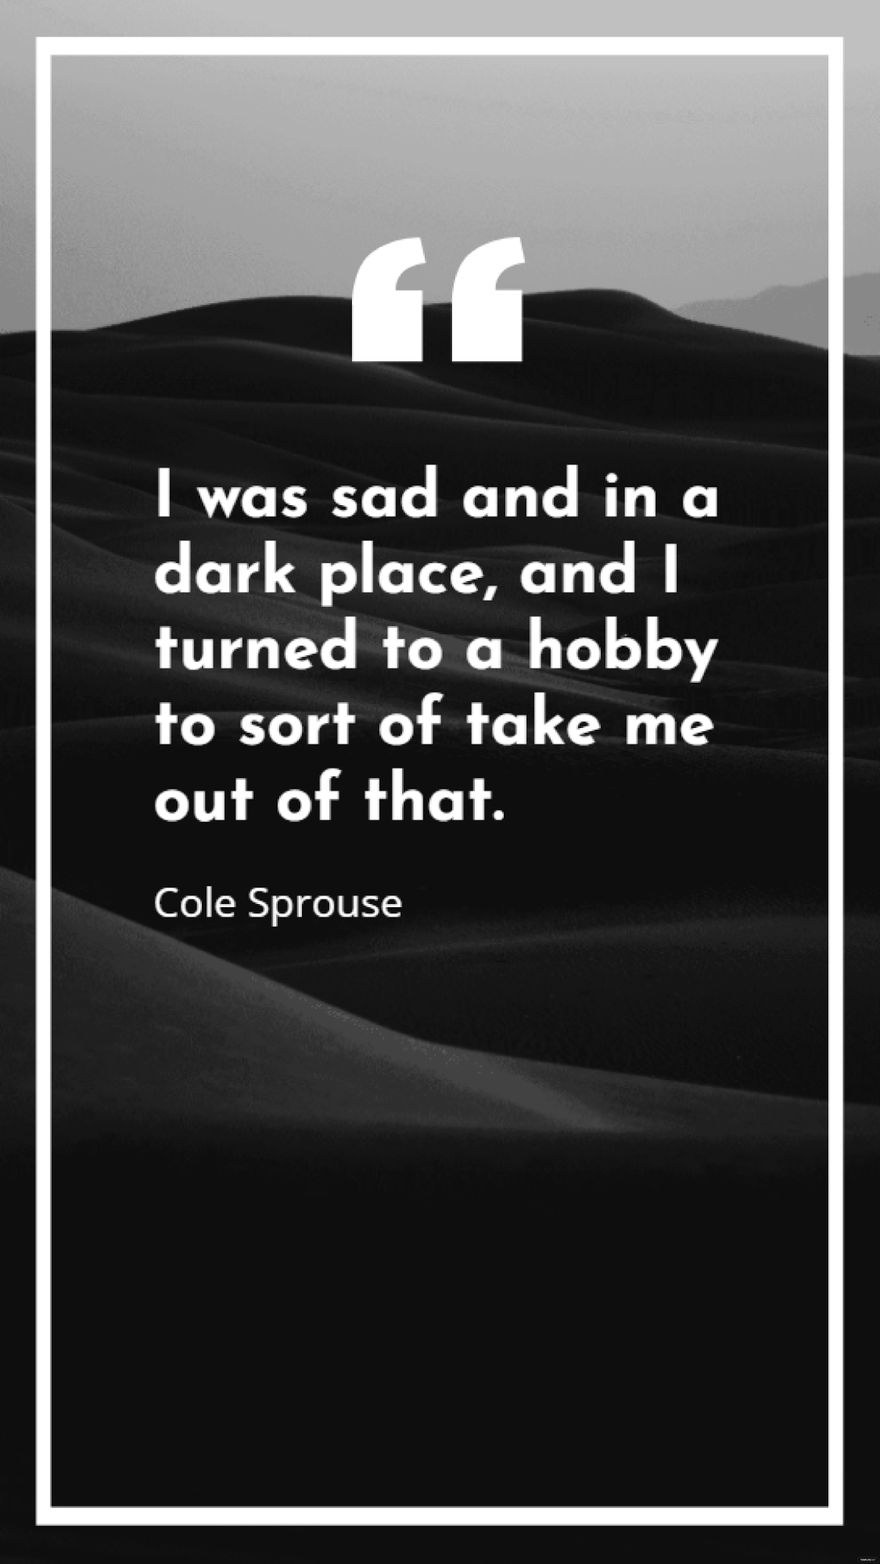 Cole Sprouse - I was sad and in a dark place, and I turned to a hobby to sort of take me out of that.